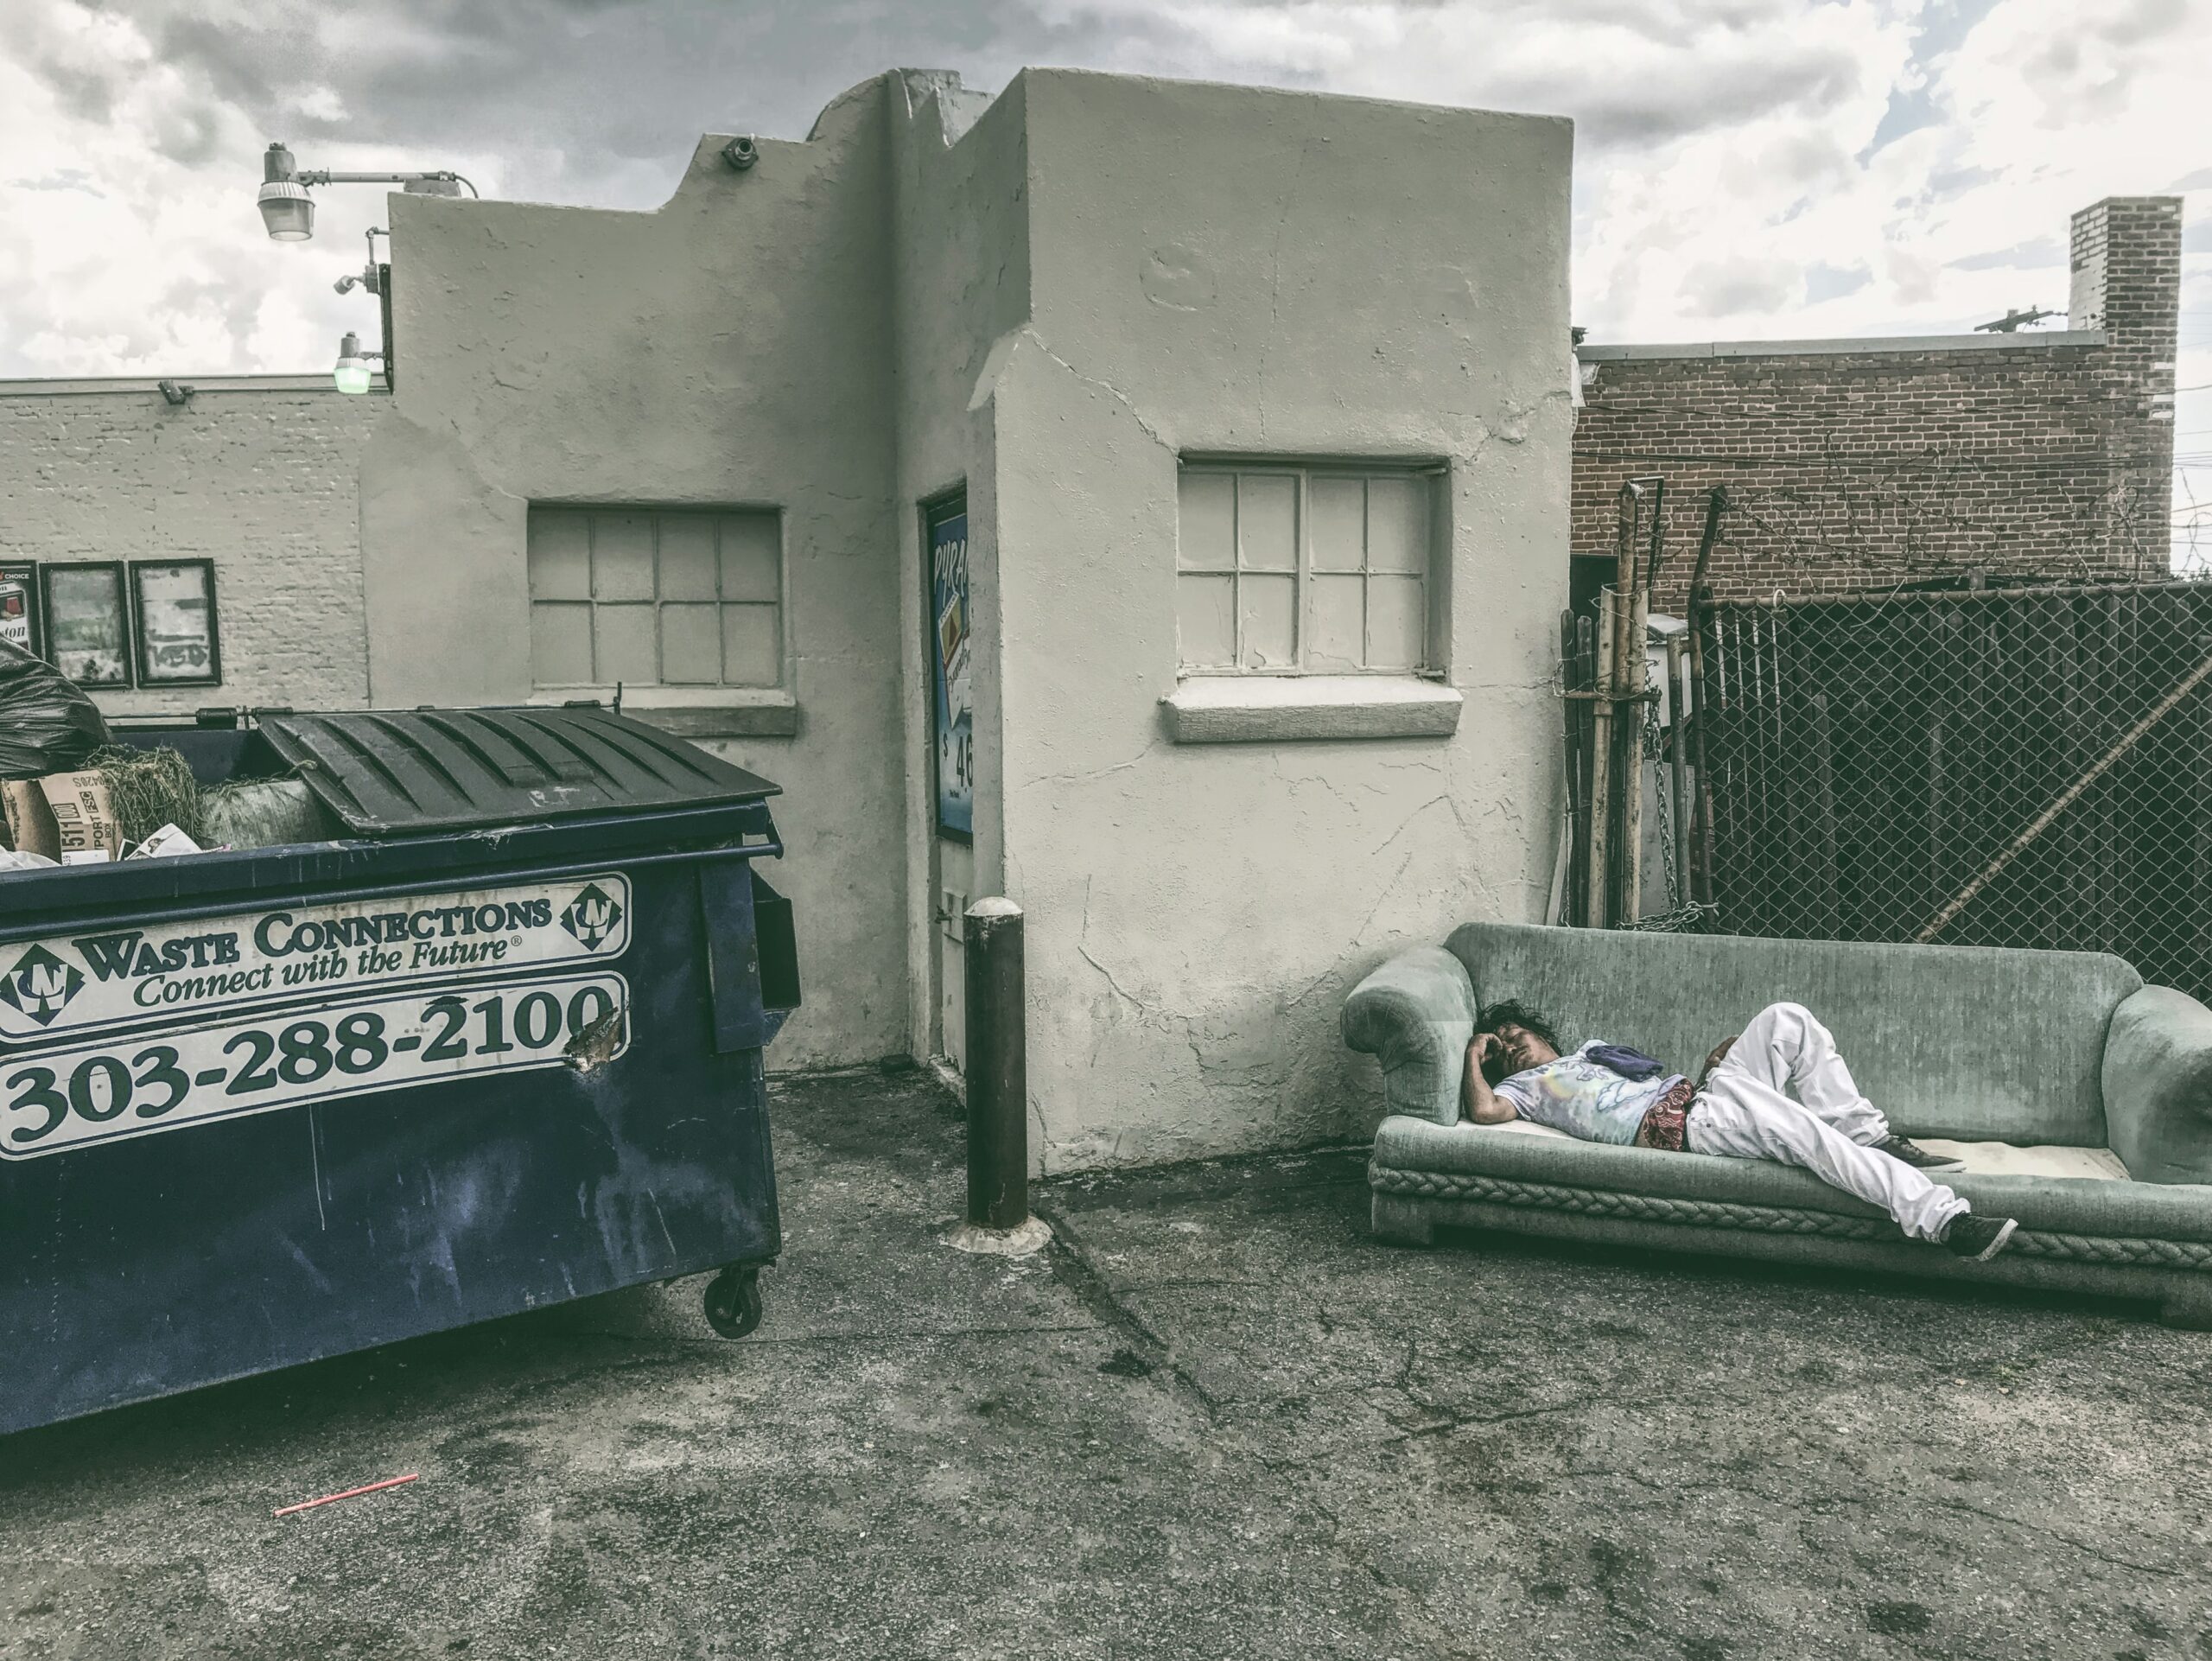 Stark image of a drunk sleeping on a couch on a rooftop